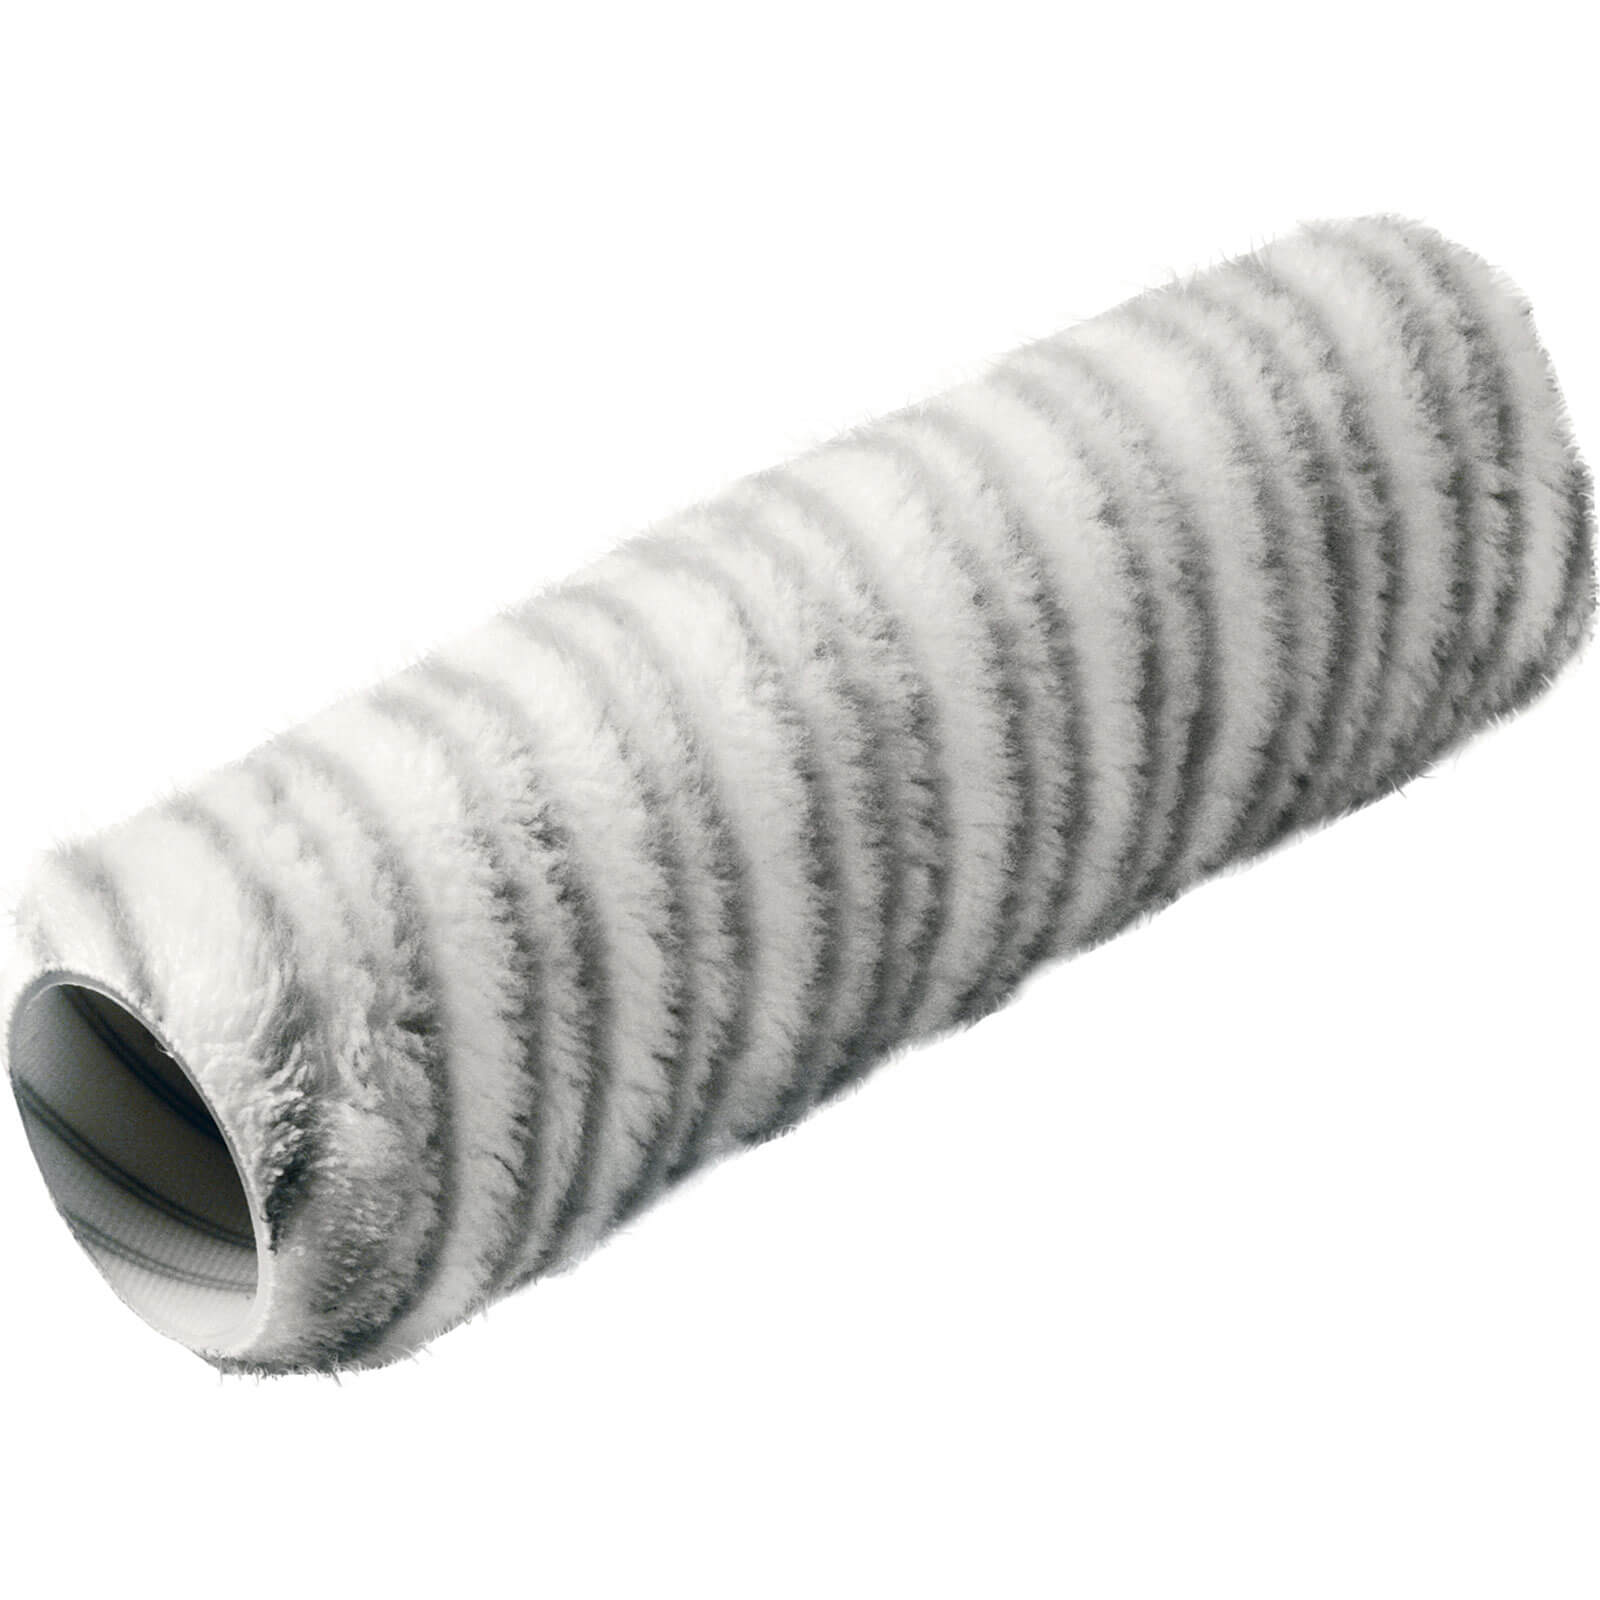 Image of Stanley Long Pile Silver Stripe Paint Roller Sleeve 44mm 230mm